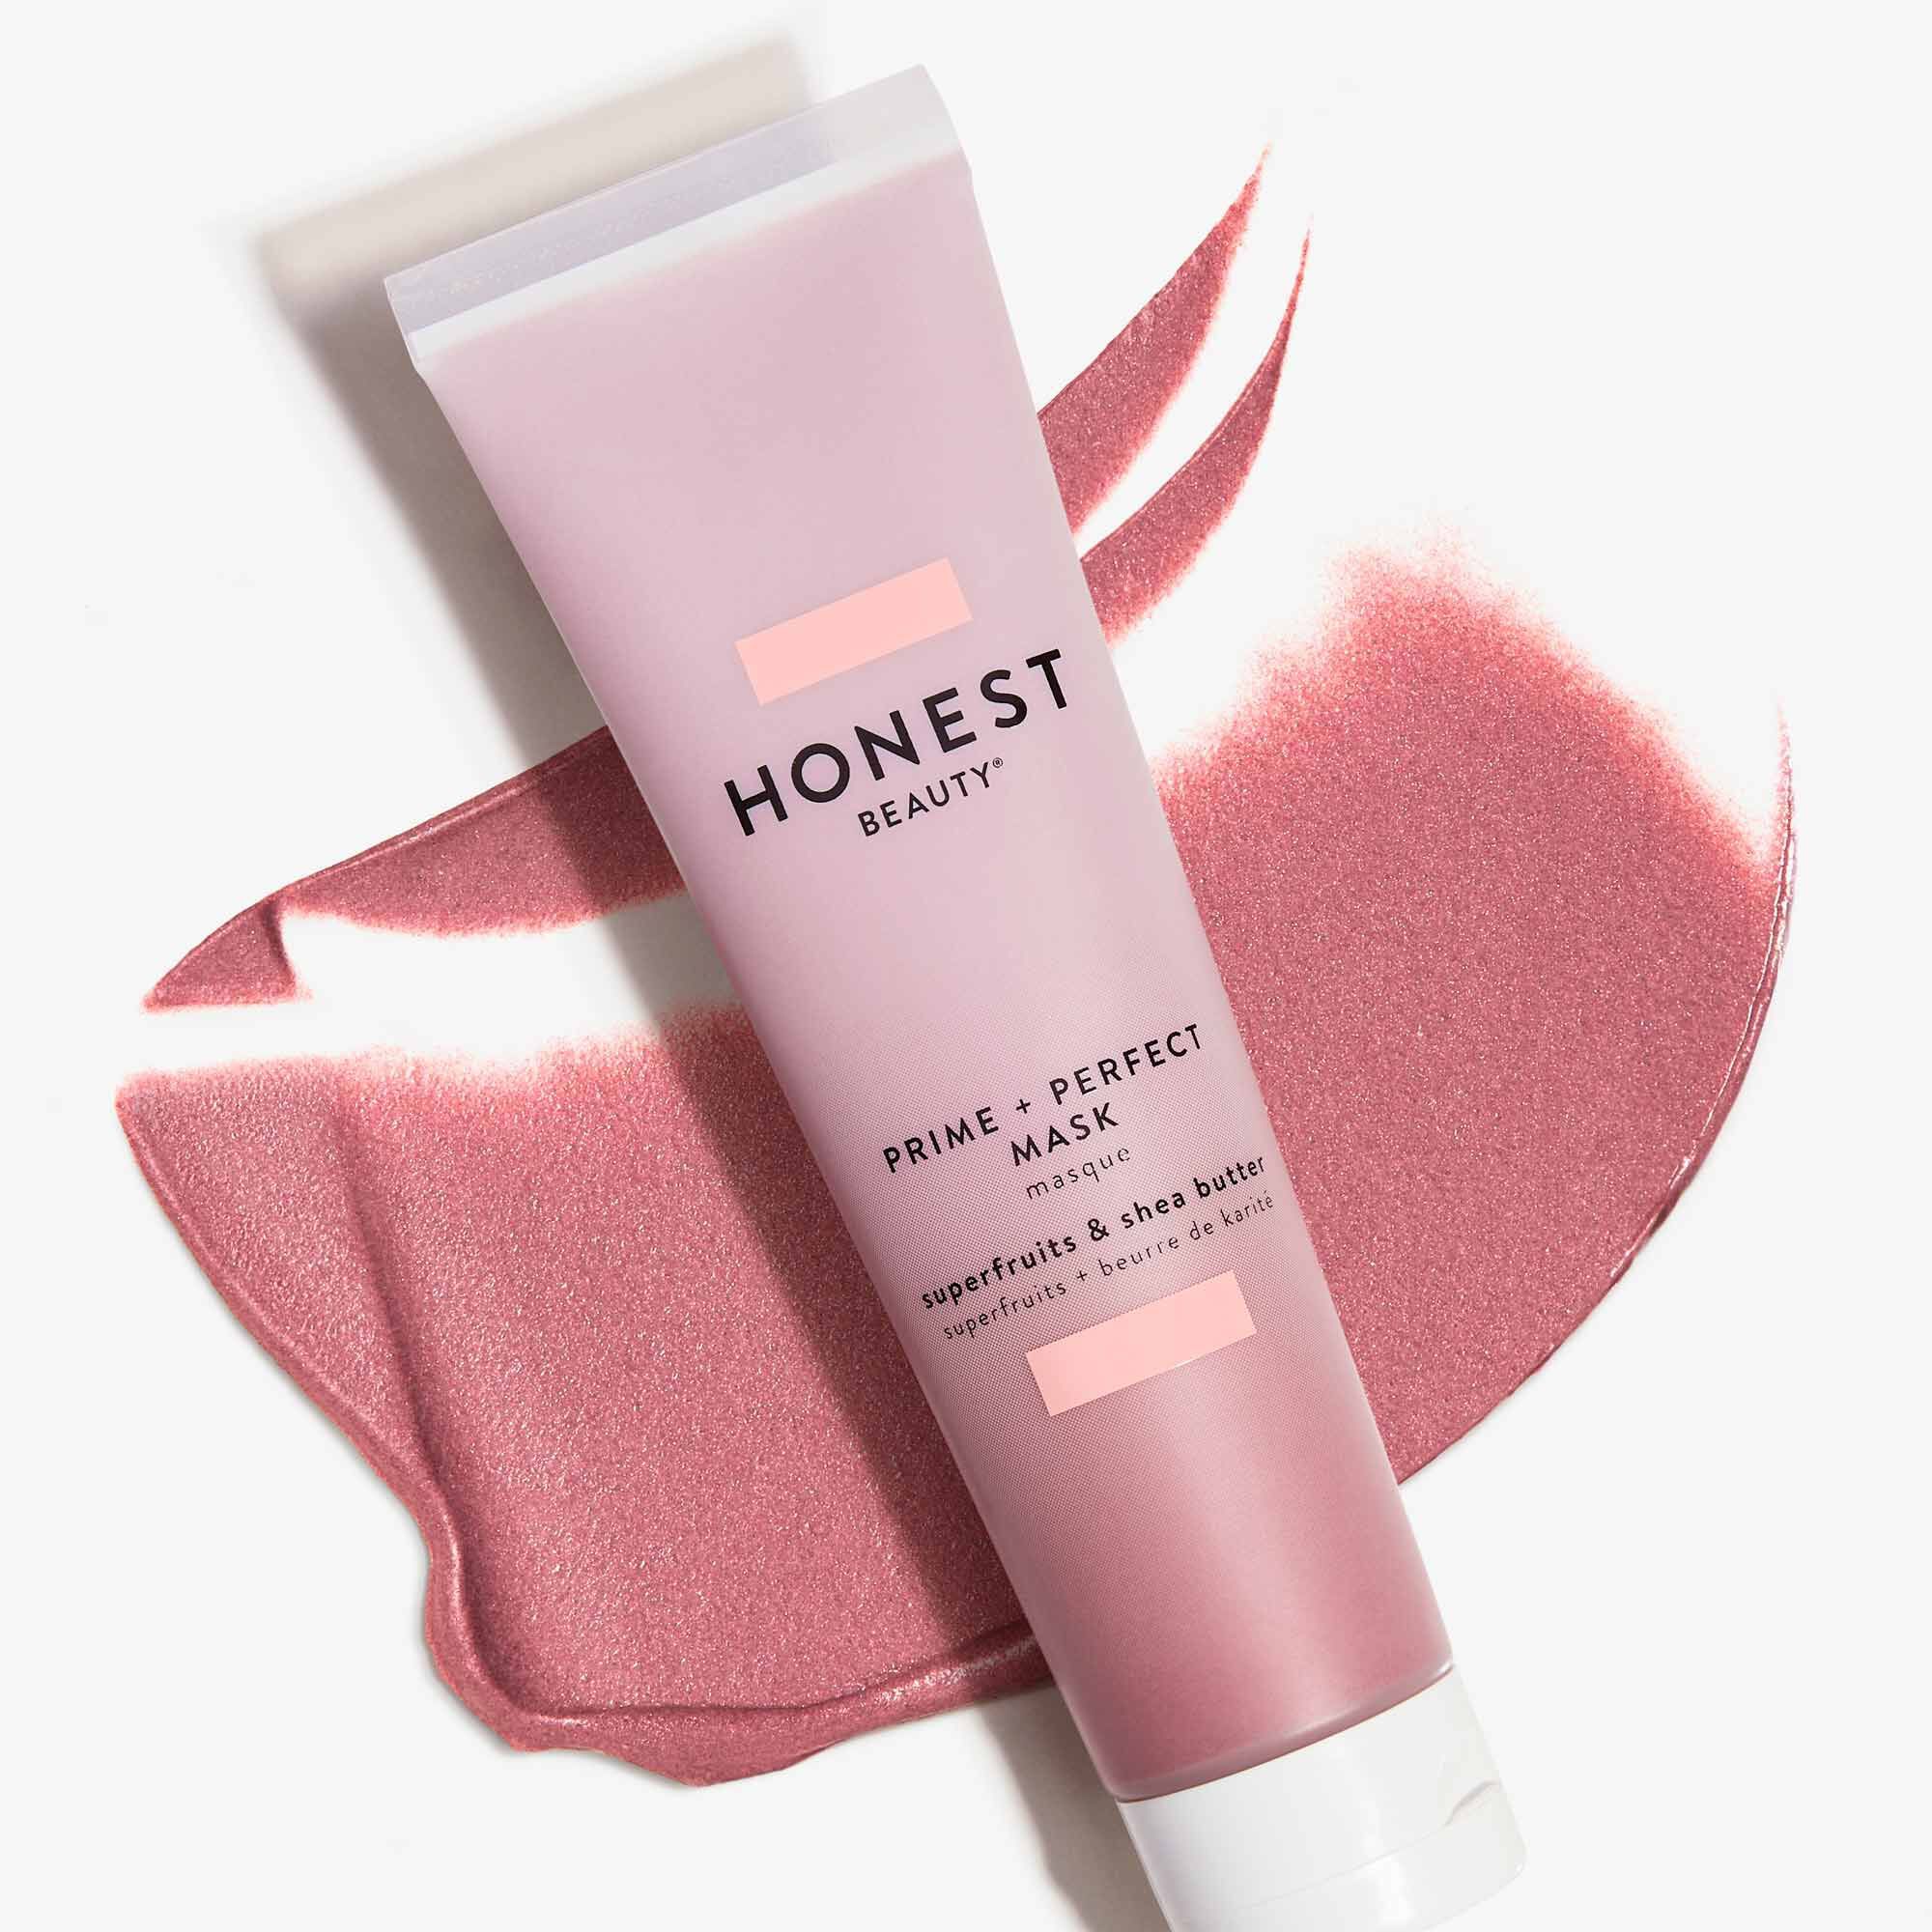 Prime + Perfect Mask | The Honest Company